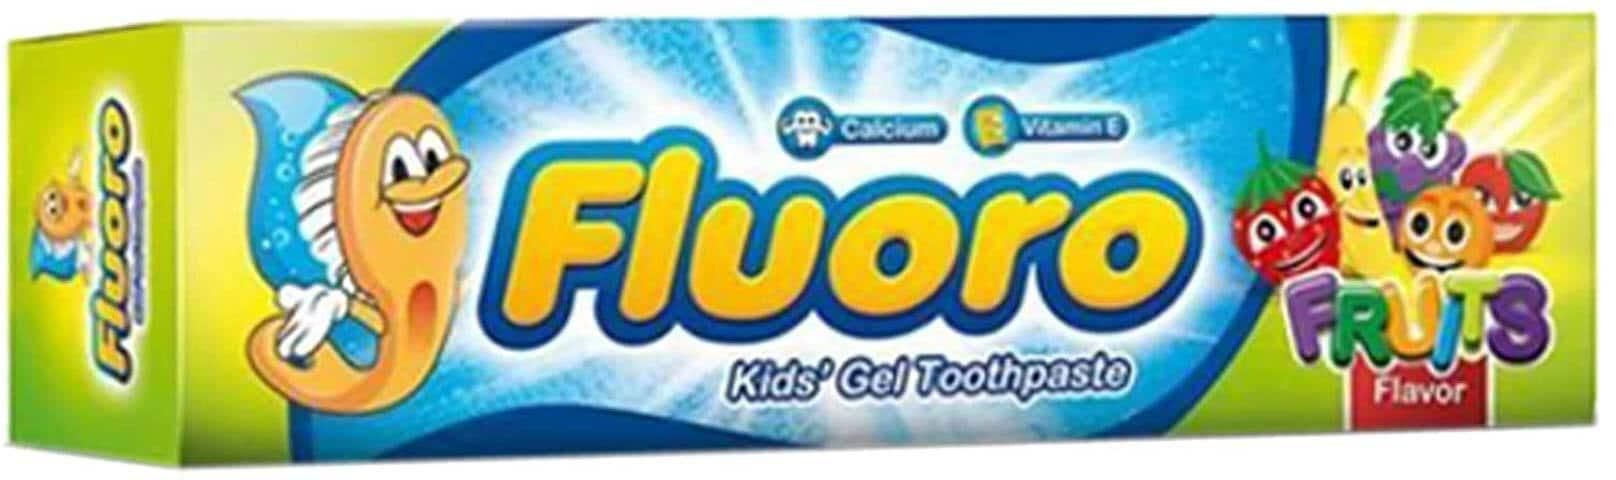 Fluoro Gel Toothpaste with Fruits Flavor for Kids - 50 gram